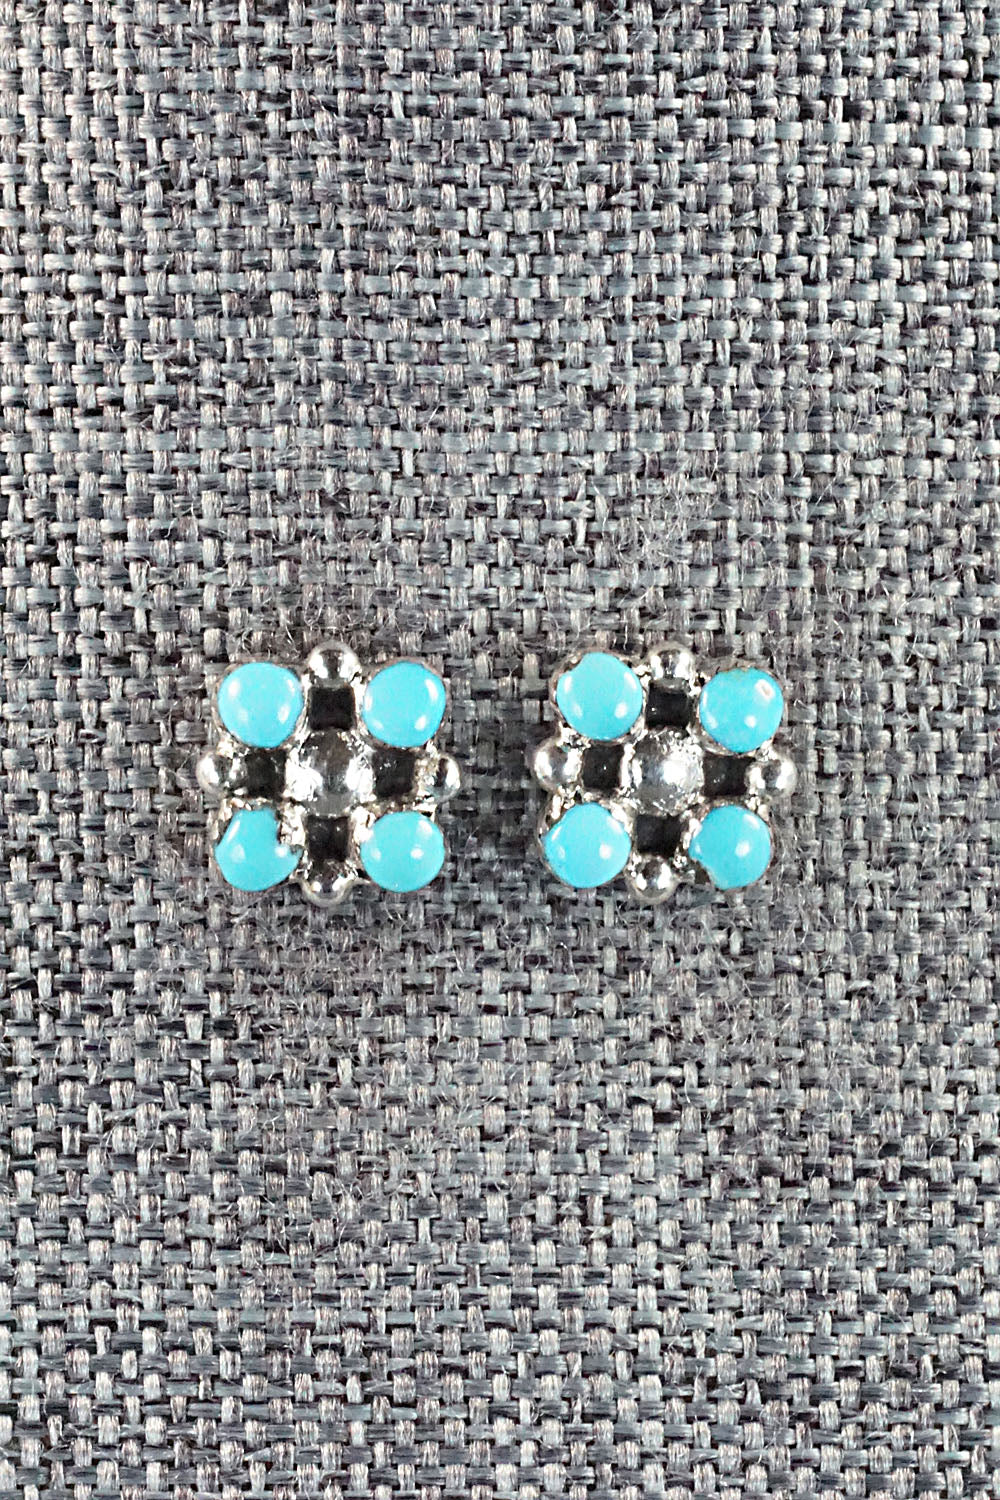 Turquoise & Sterling Silver Earrings - Maxine Malanie